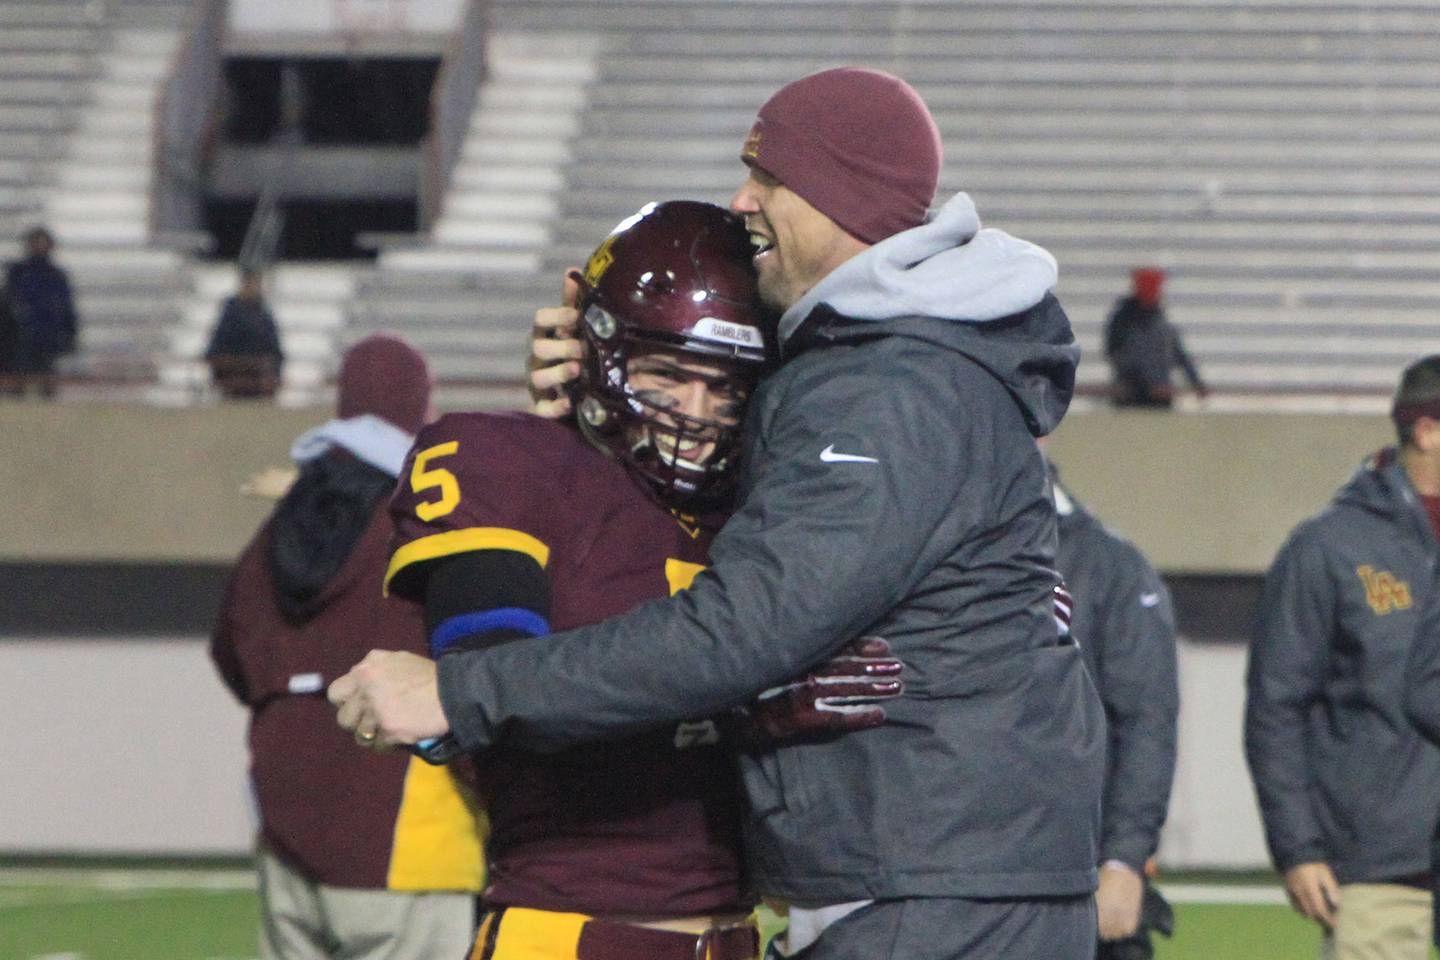 Beau Desherow (right) celebrates with son Robert J. “Bobby” Desherow ’16 after Loyola defeated Marist 41-0 to clinch the 2015 IHSA Class 8A state championship, the second in school history. At the time, Desherow served as varsity defensive line coach. Photo provided by Loyola Academy.